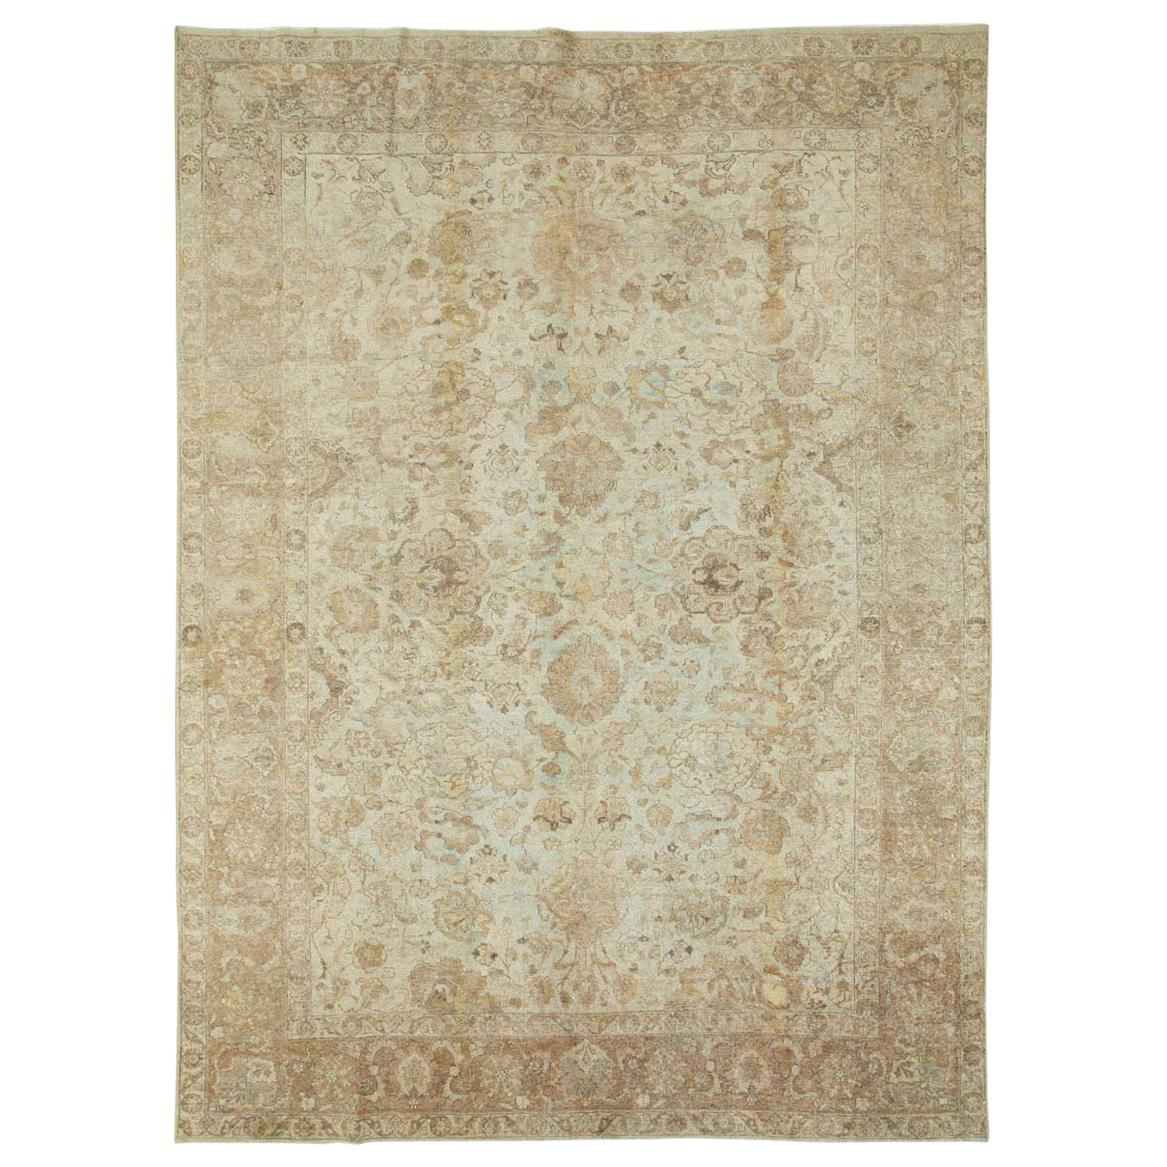 Early 20th Century Handmade Persian Tabriz Accent Rug with Muted Neutral Tones For Sale